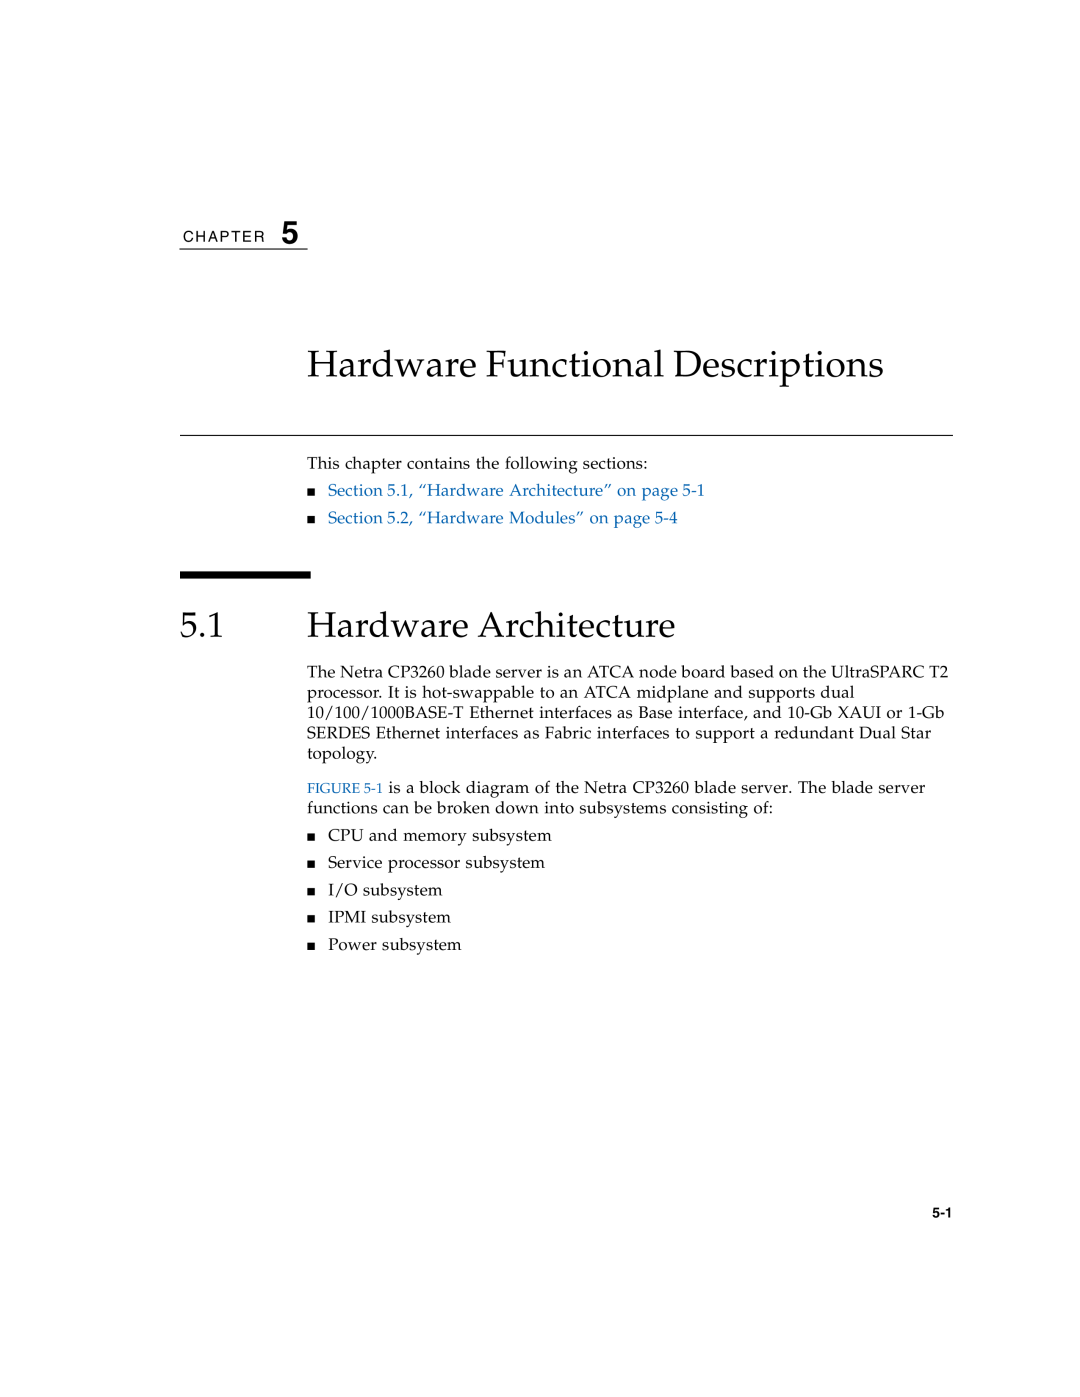 Sun Microsystems CP3260 manual Hardware Functional Descriptions, 1, “Hardware Architecture” on page 